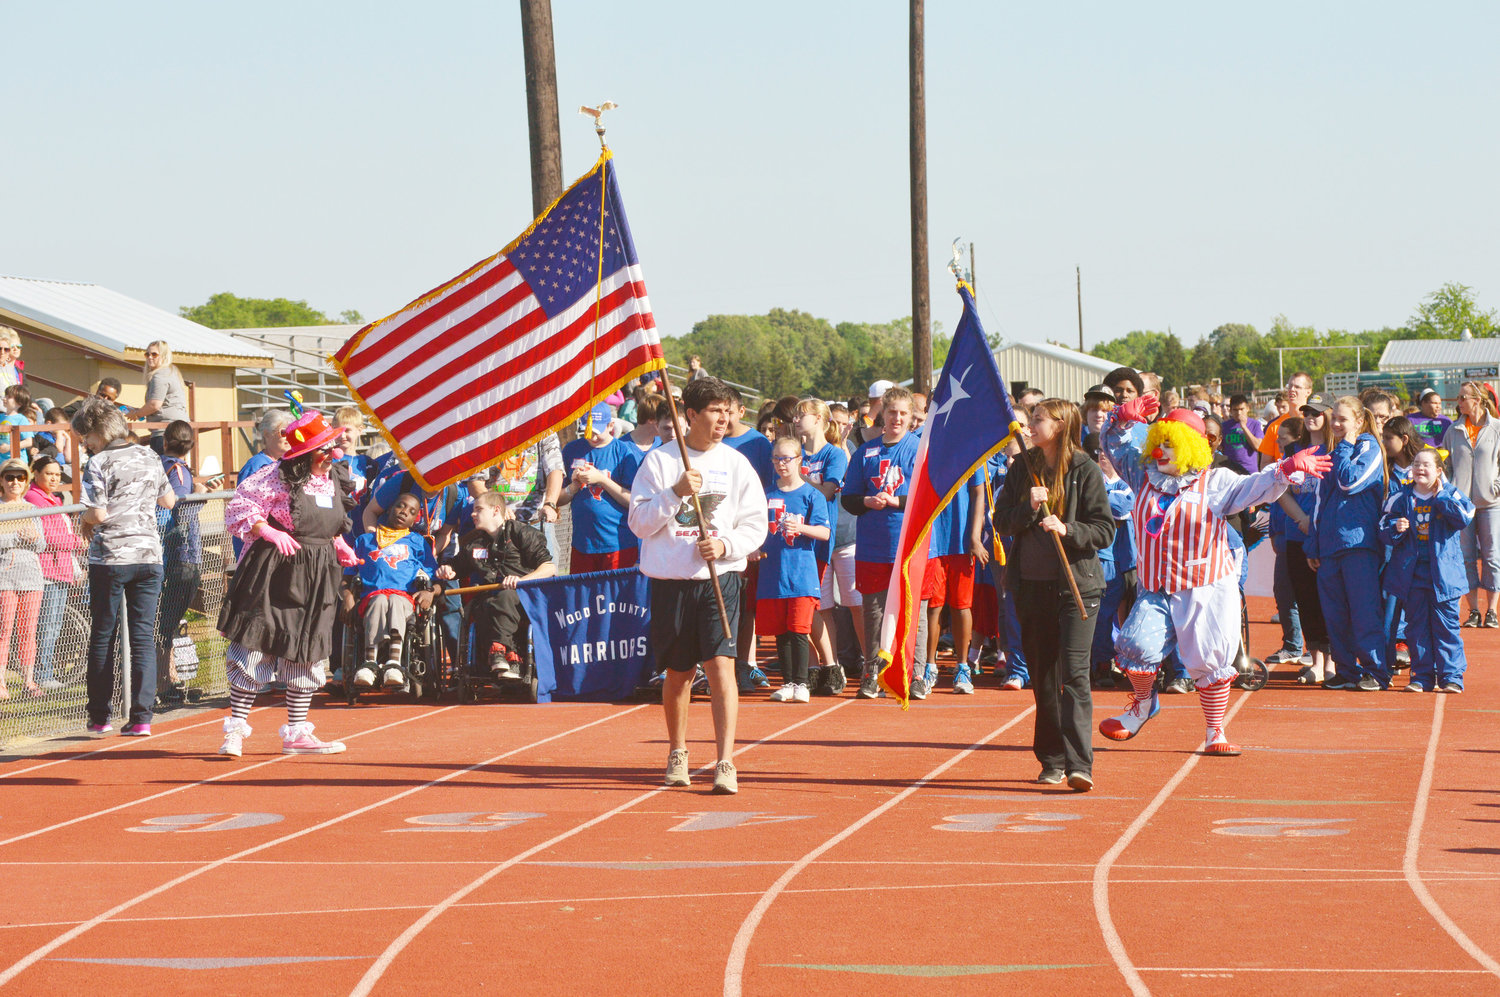 The opening of the Pilot Club Special Olympics was a grand march of all the competitors in the event.